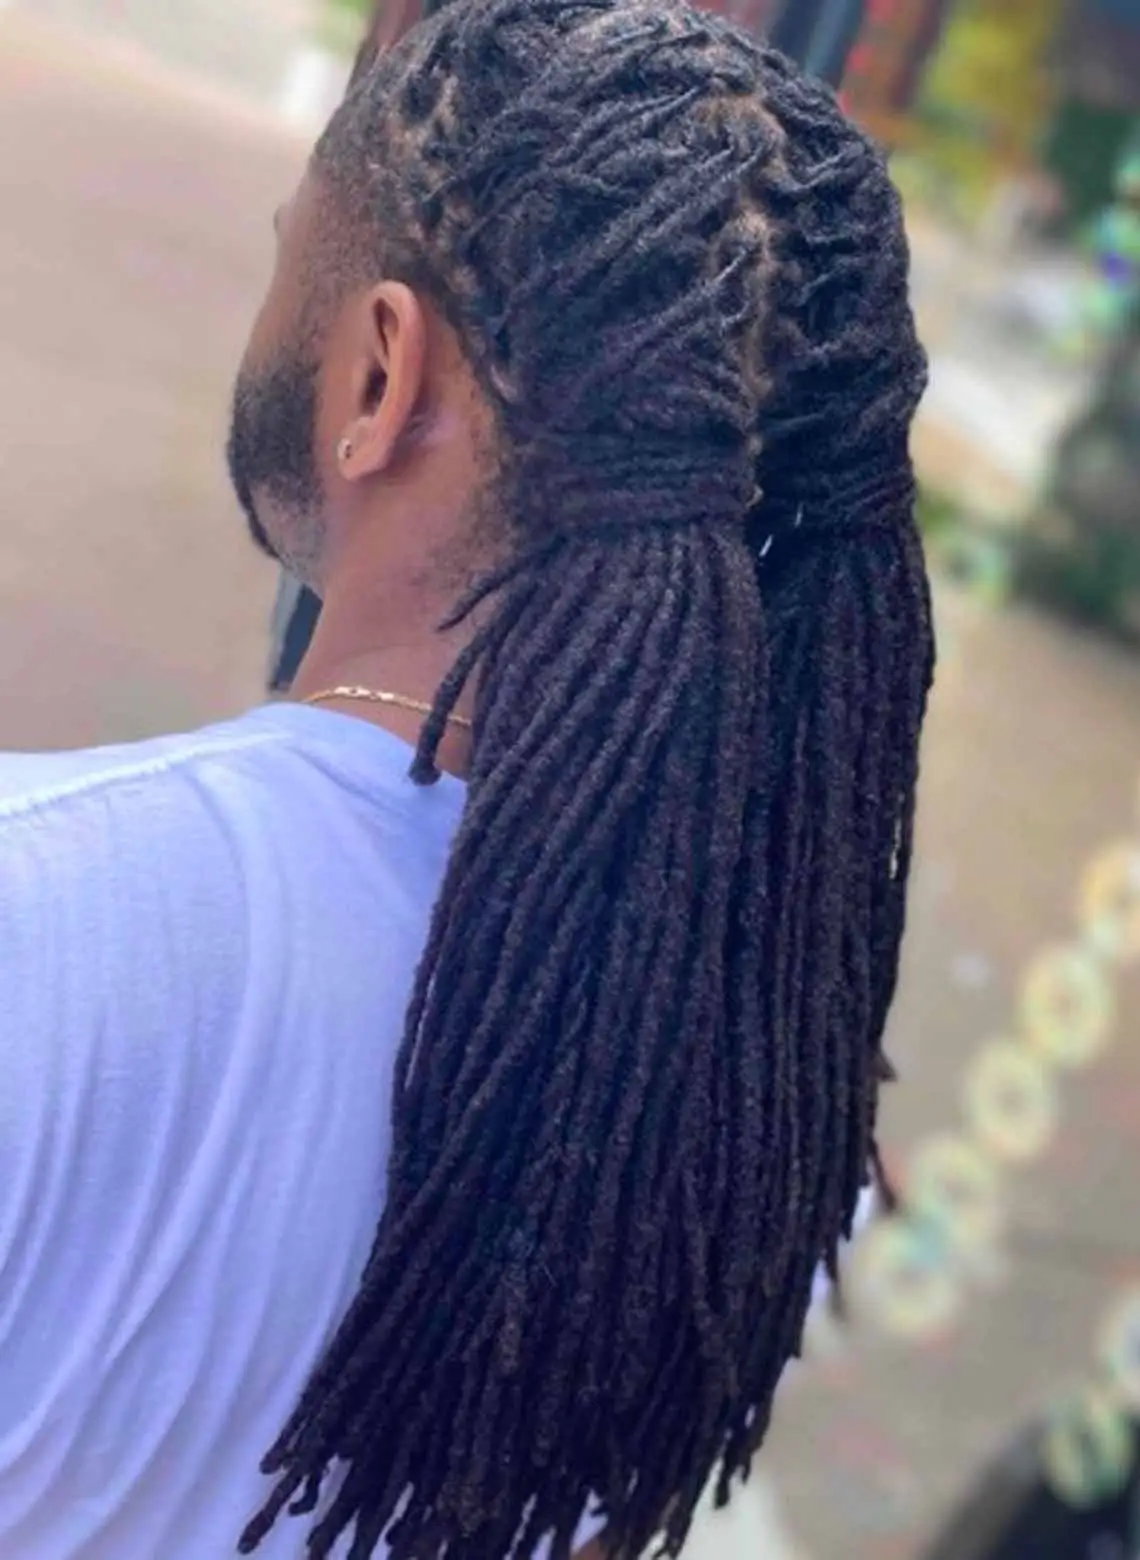 Image of man with braided locs.